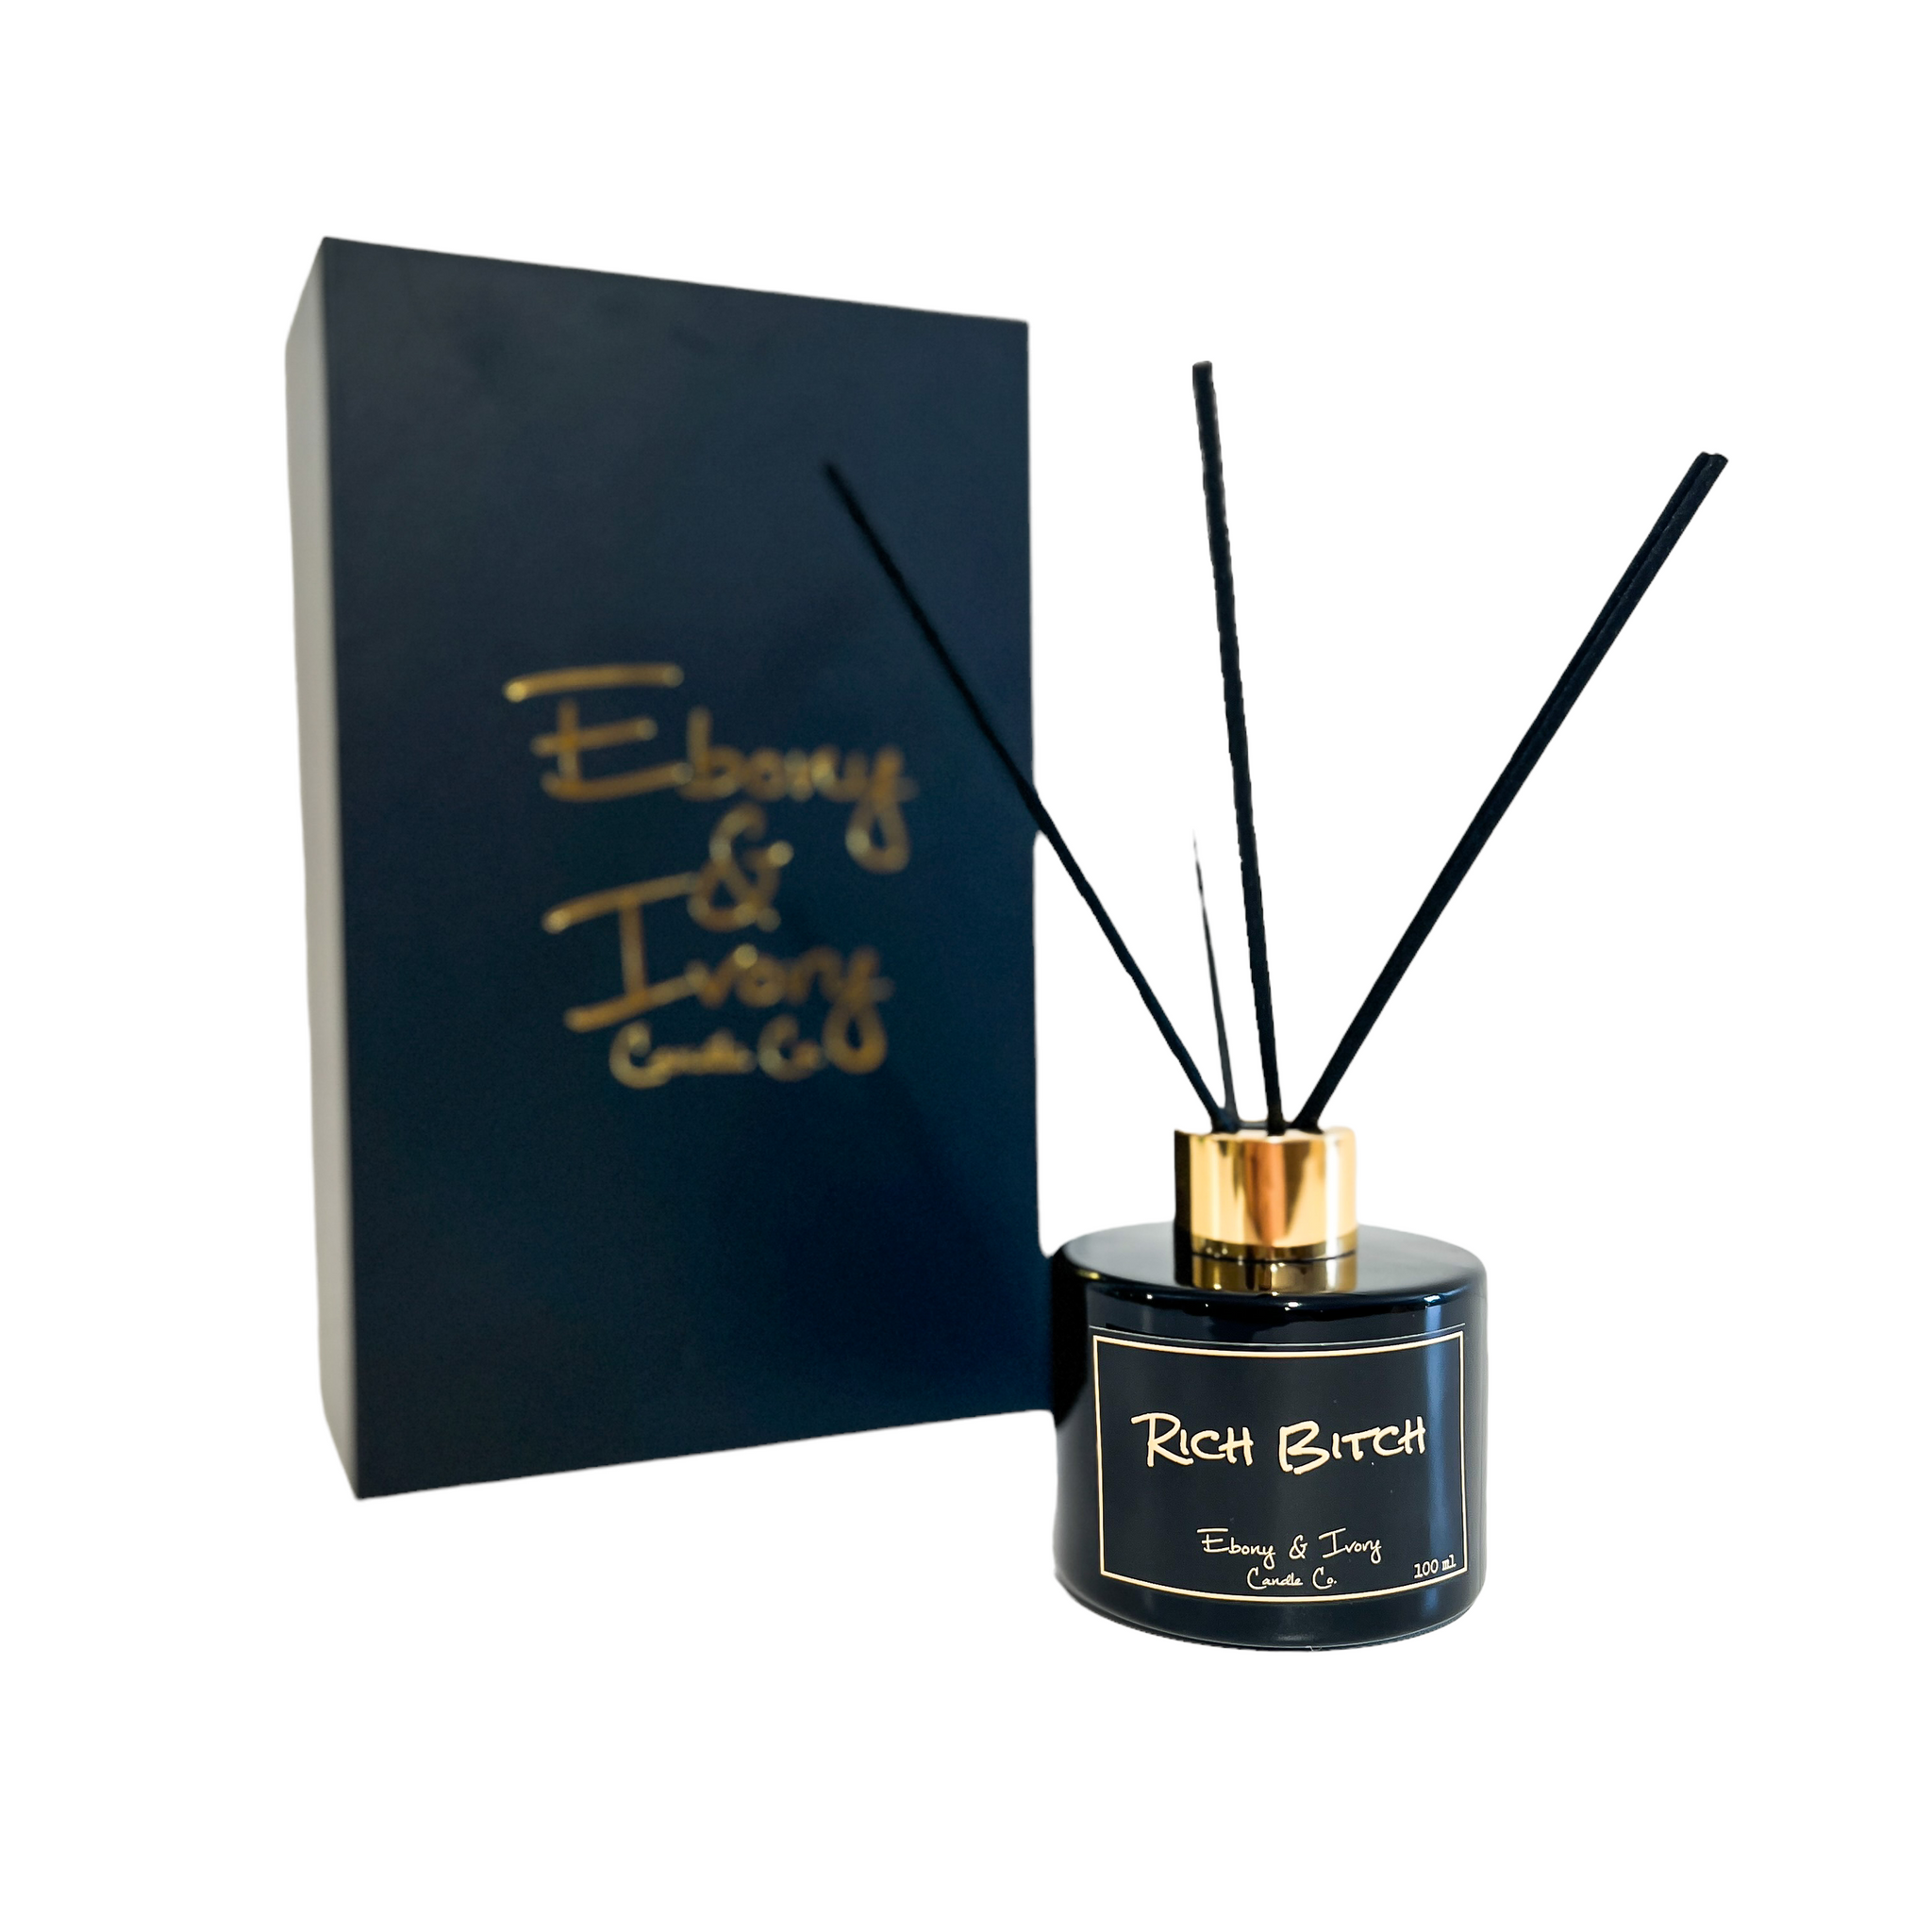 Black, one hundred milliliter, oud, bergamot, and citrus scented reed diffuser with a gold lid and a black label that reads Rich Bitch